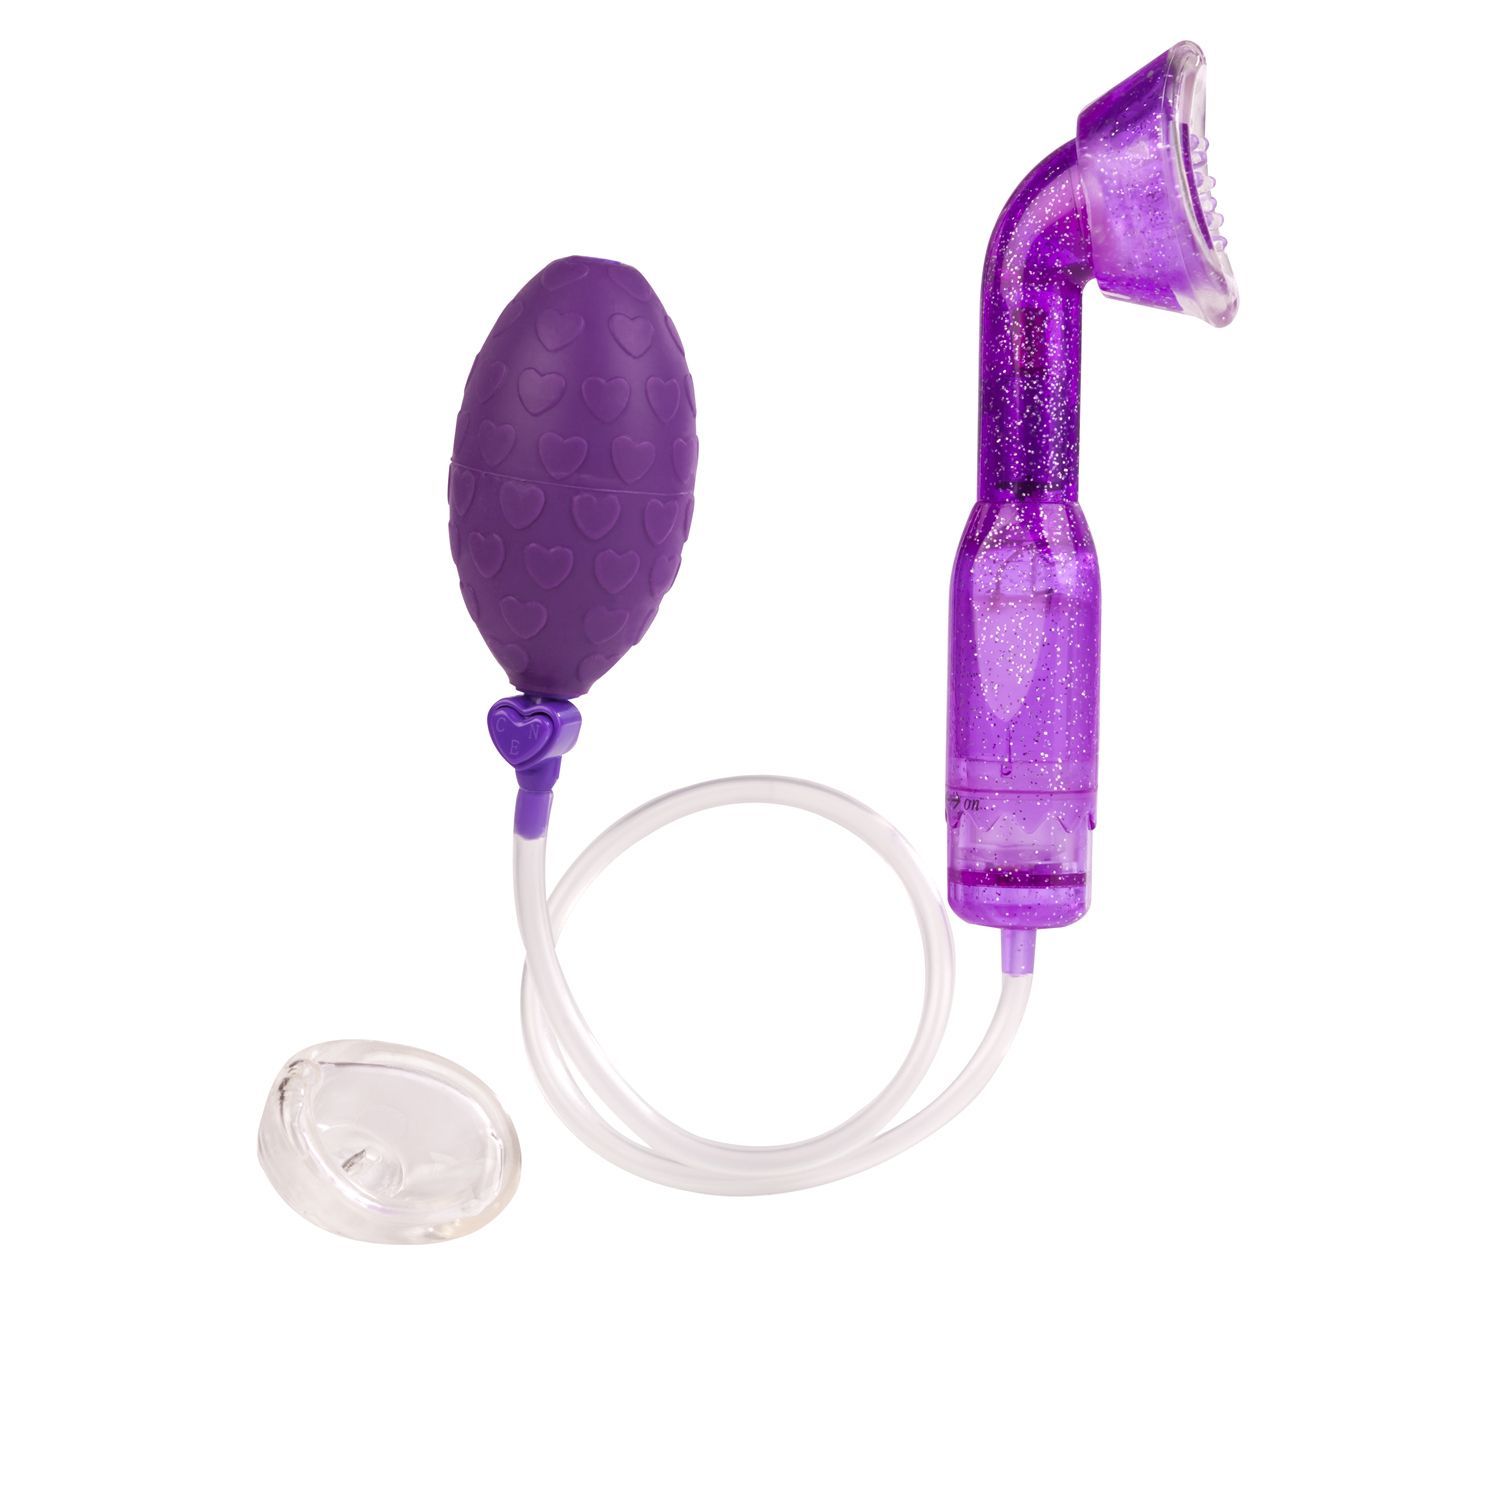 home made clitoris pumping devices Adult Pics Hq